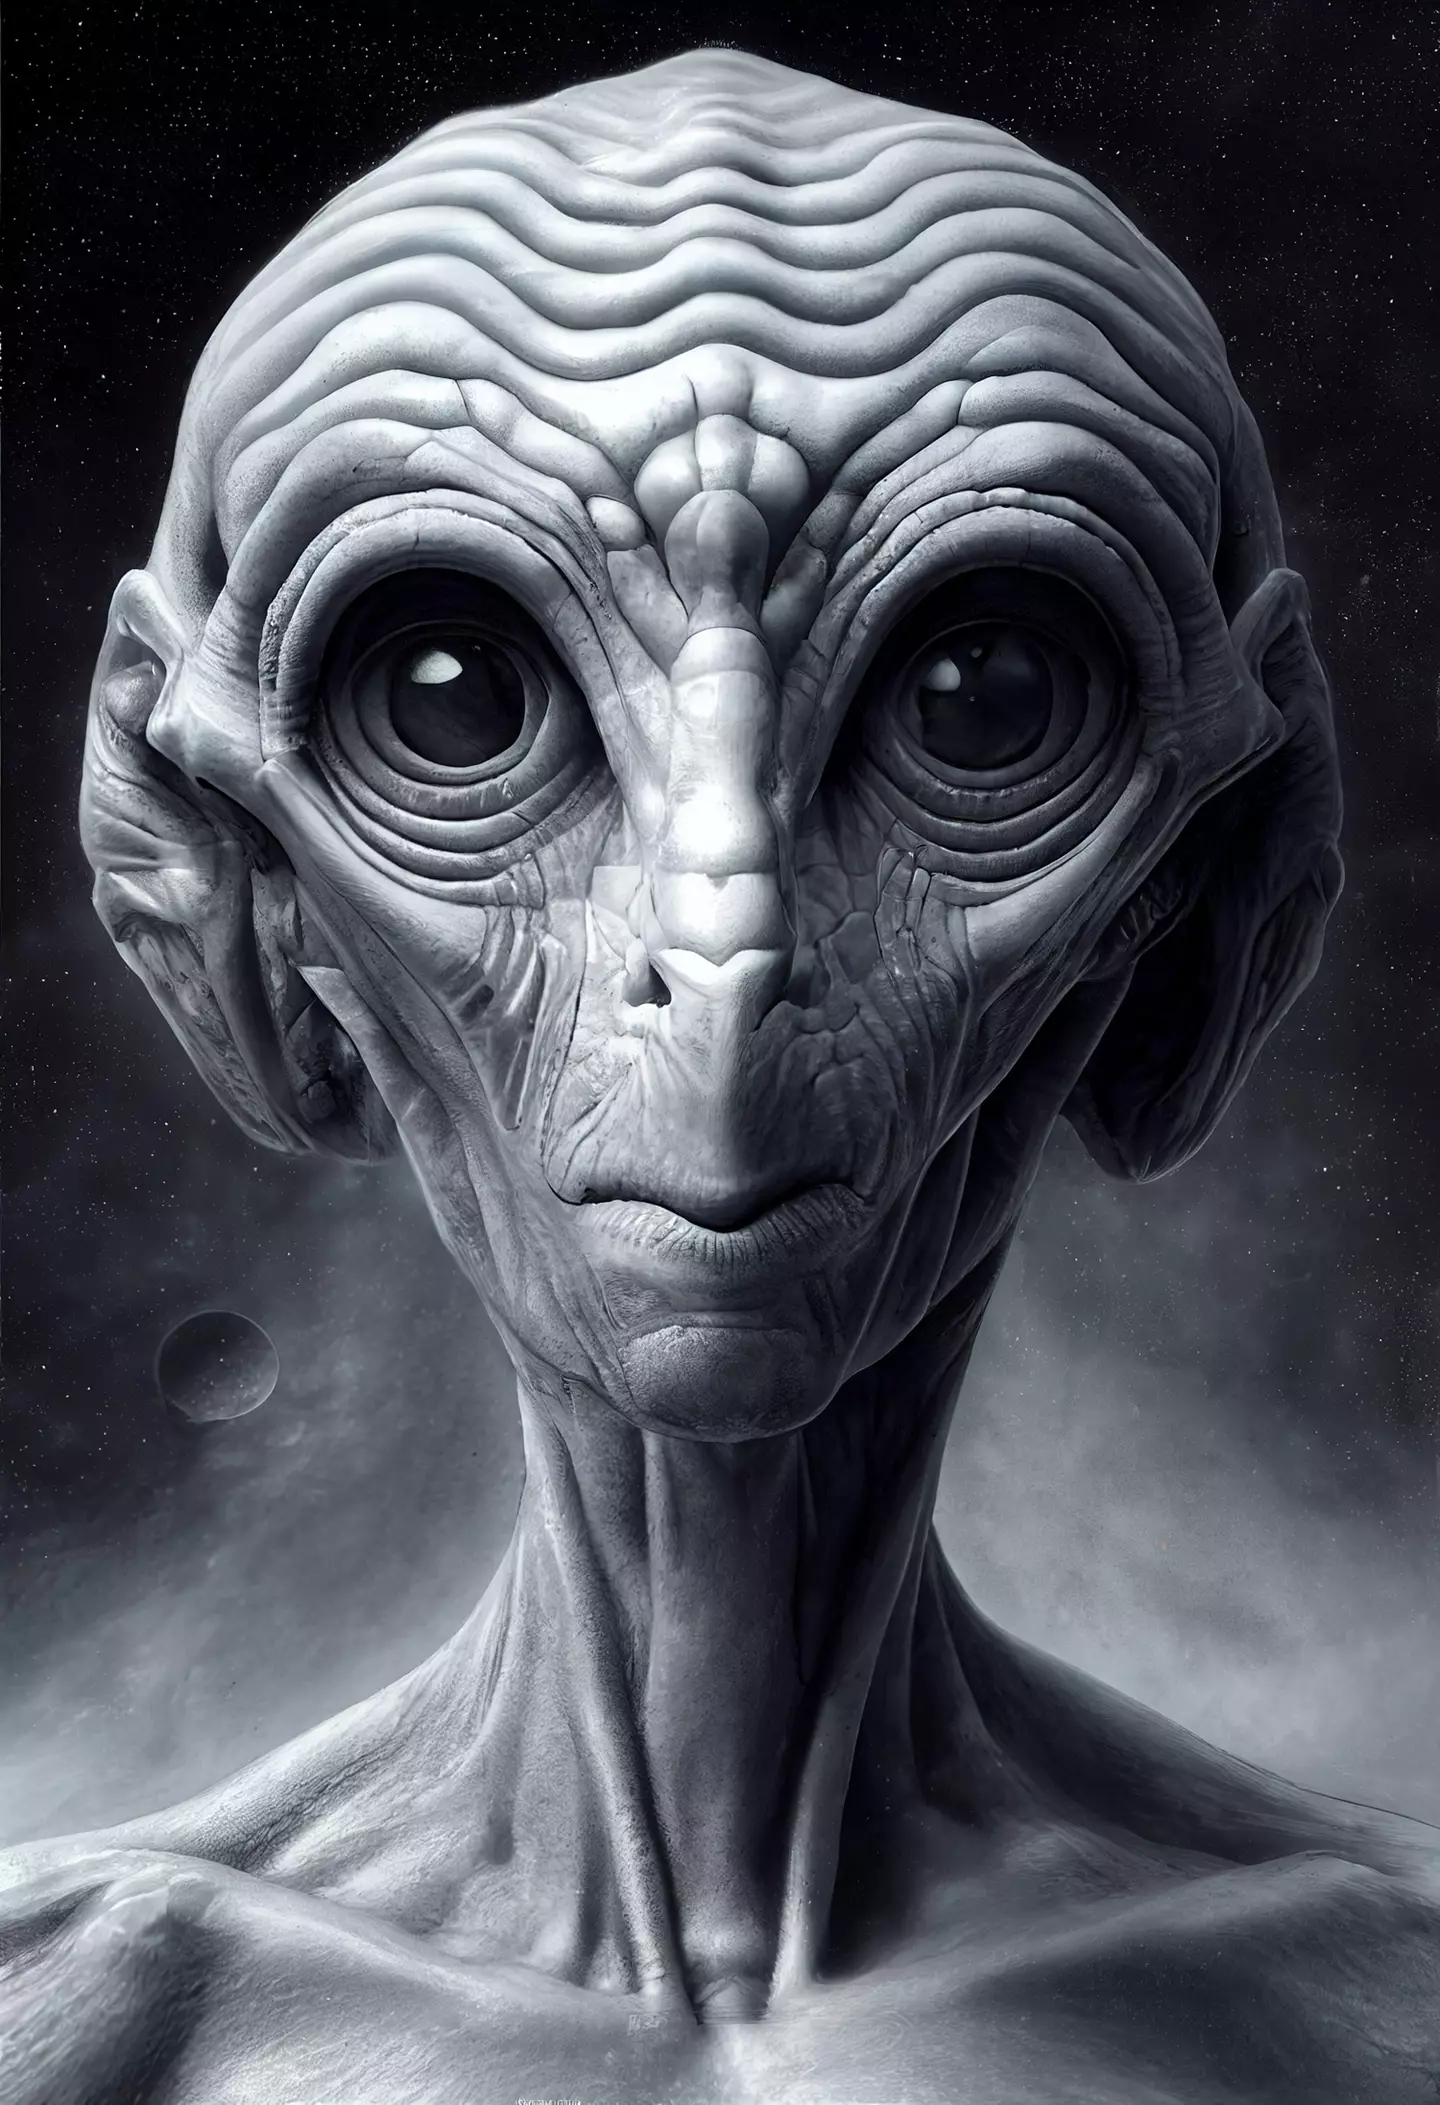 Grey aliens have similarities to humans.